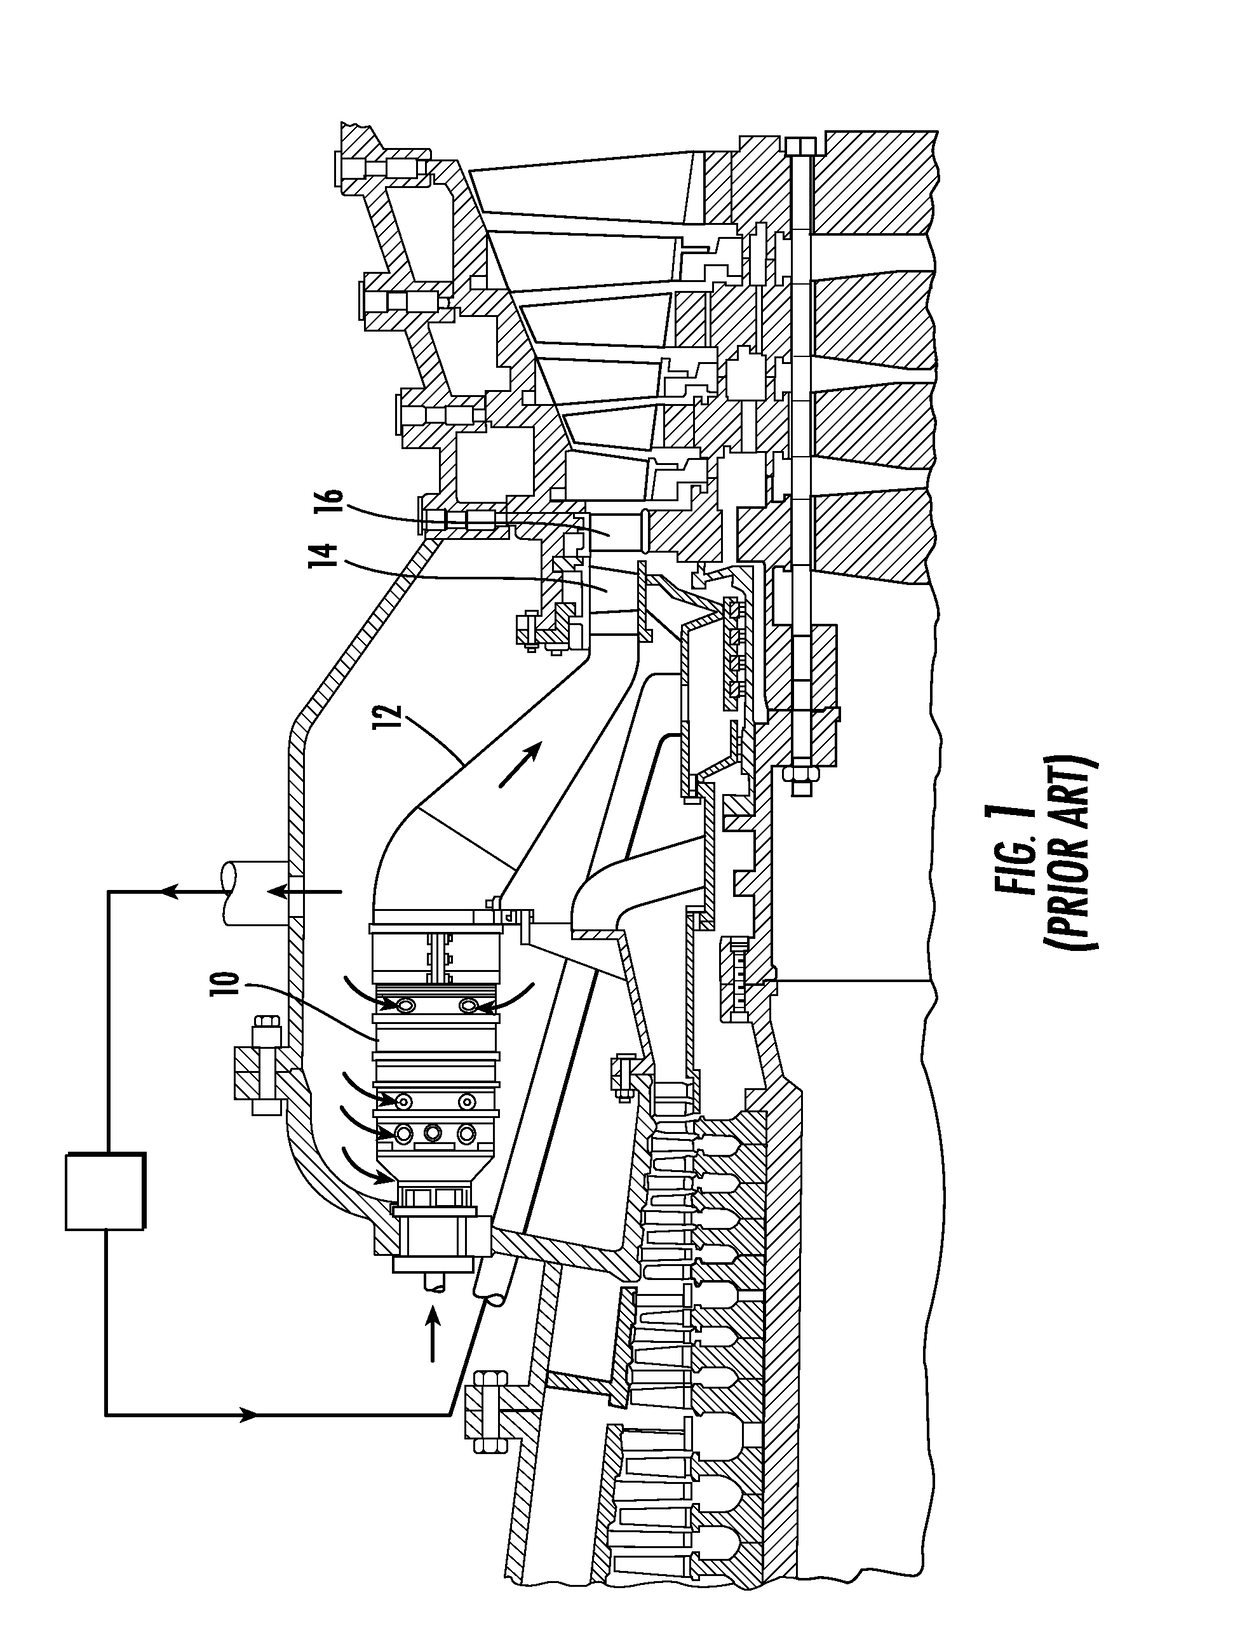 Converging flow joint insert system at an intersection between adjacent transitions extending between a combustor and a turbine assembly in a gas turbine engine